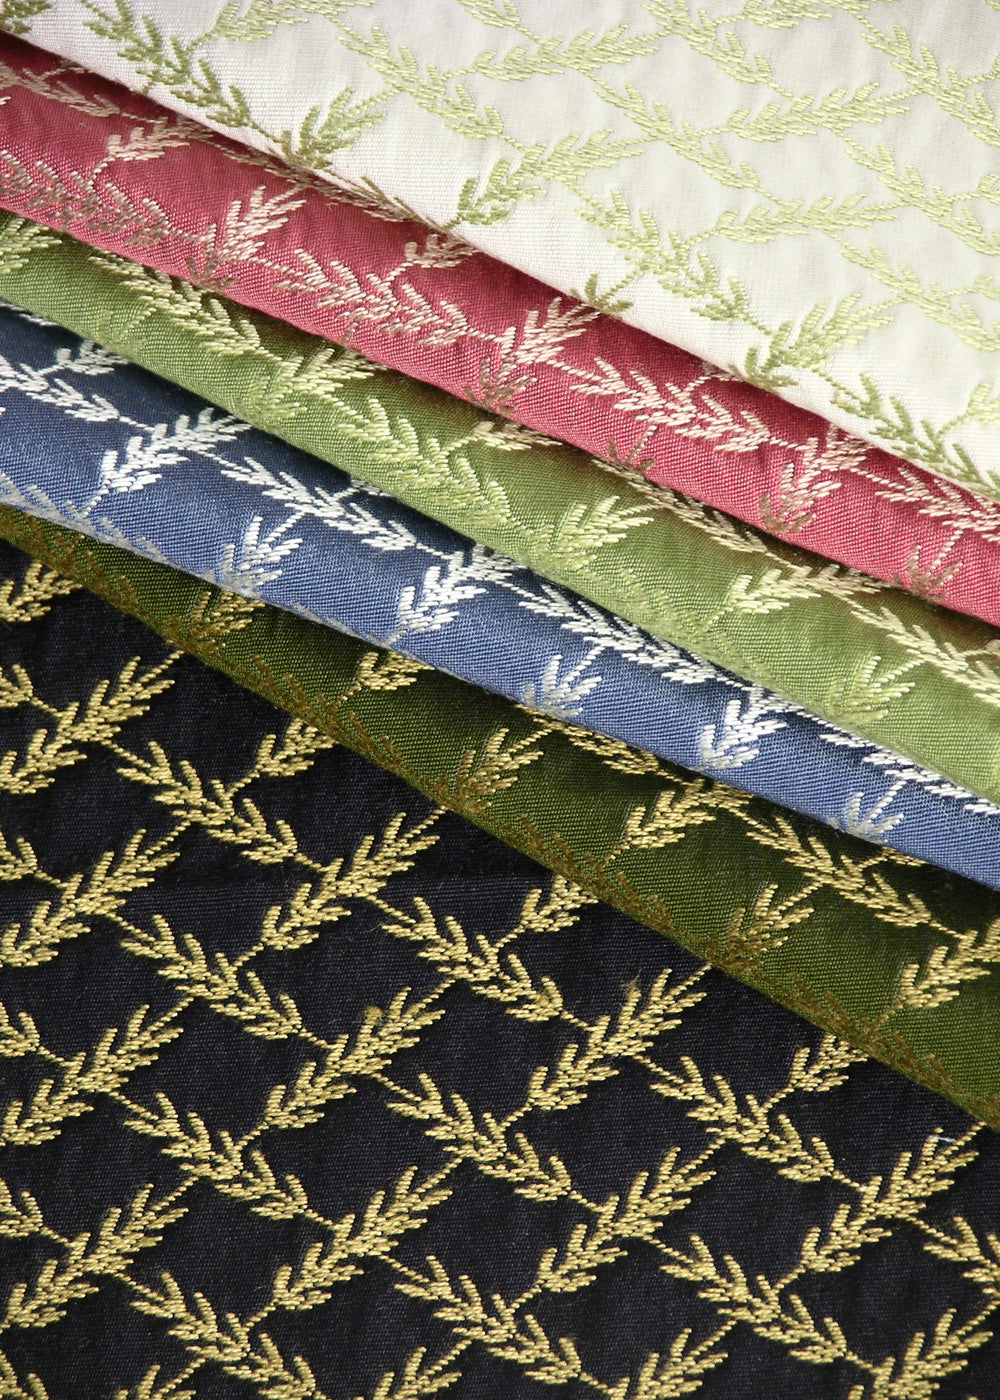 a stack of woven upholstery fabrics that feature a small-scale metallic pattern that looks like ears of wheat